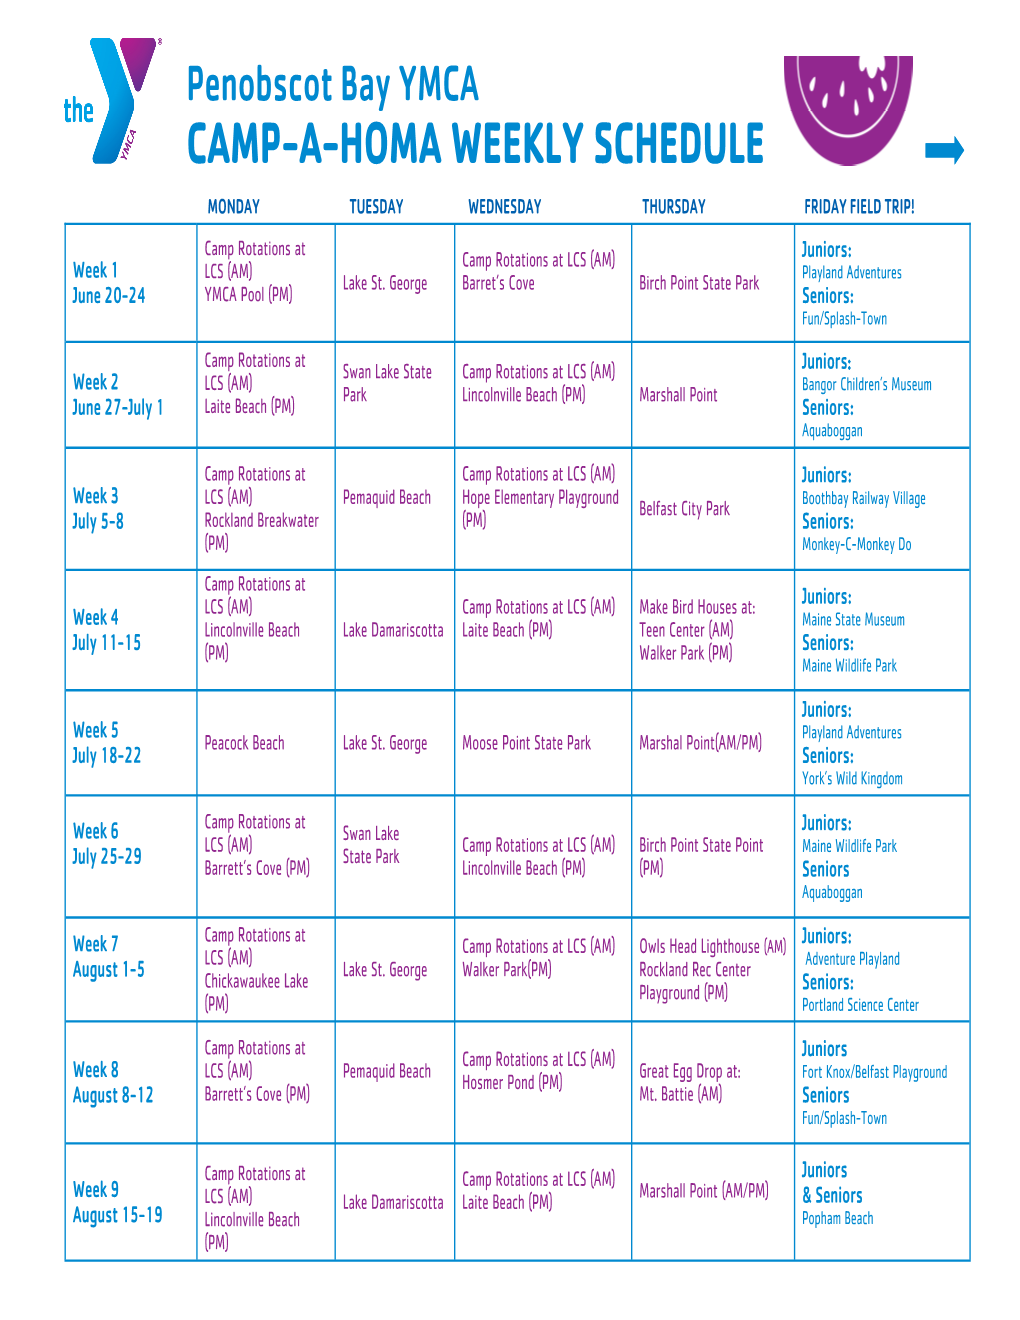 Camp-A-Homa What's It About and Weekly Schedule